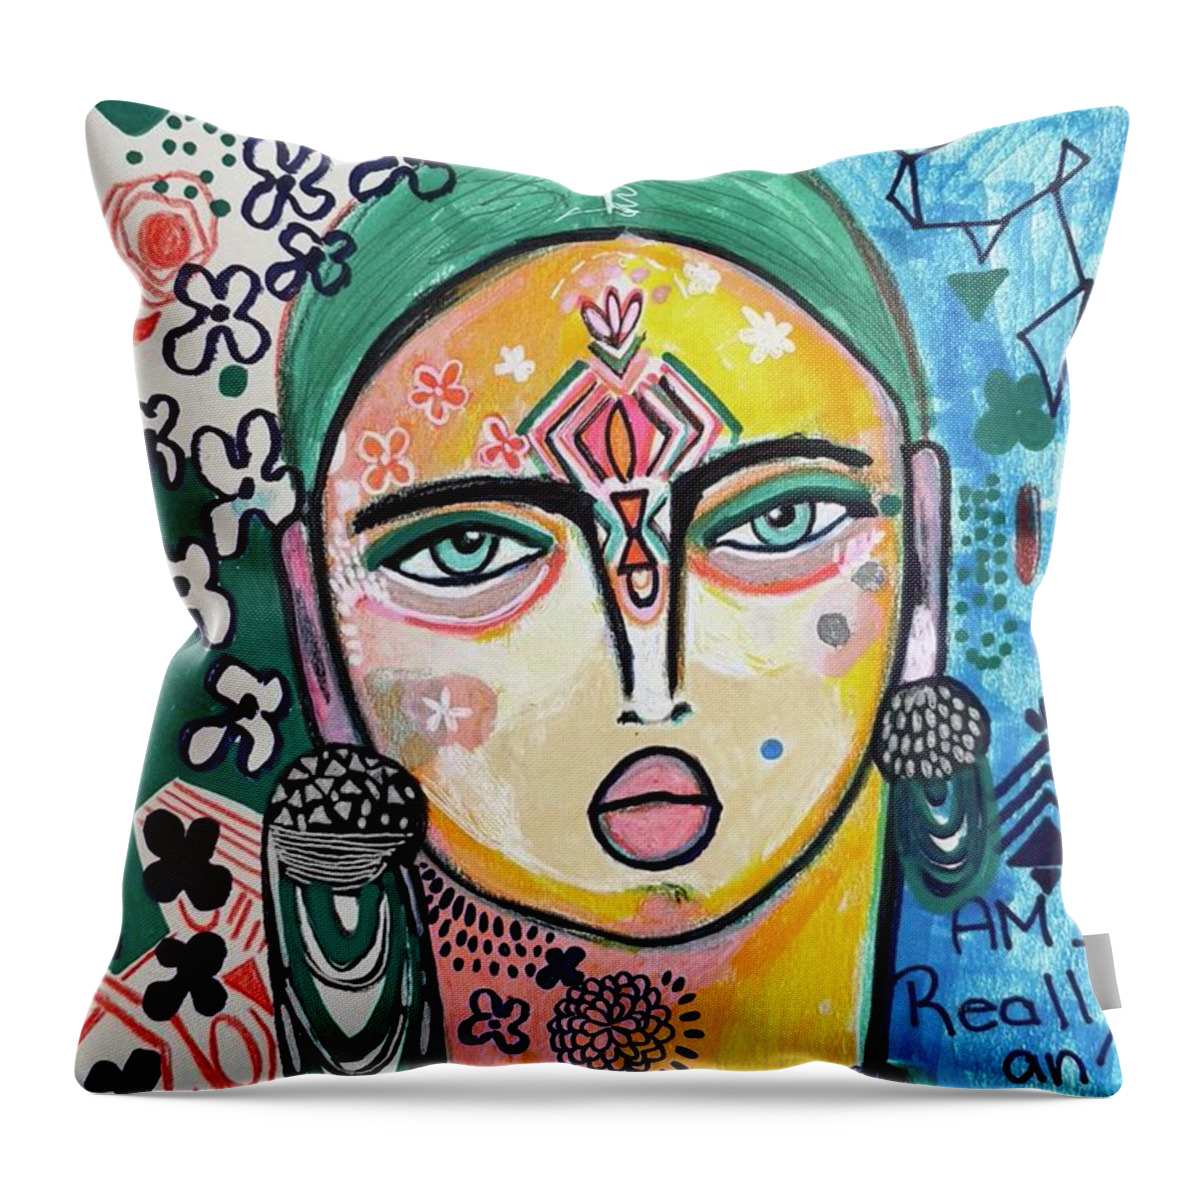 Abstract Face Art Throw Pillow featuring the mixed media Free Spirit Girl by Rosalina Bojadschijew